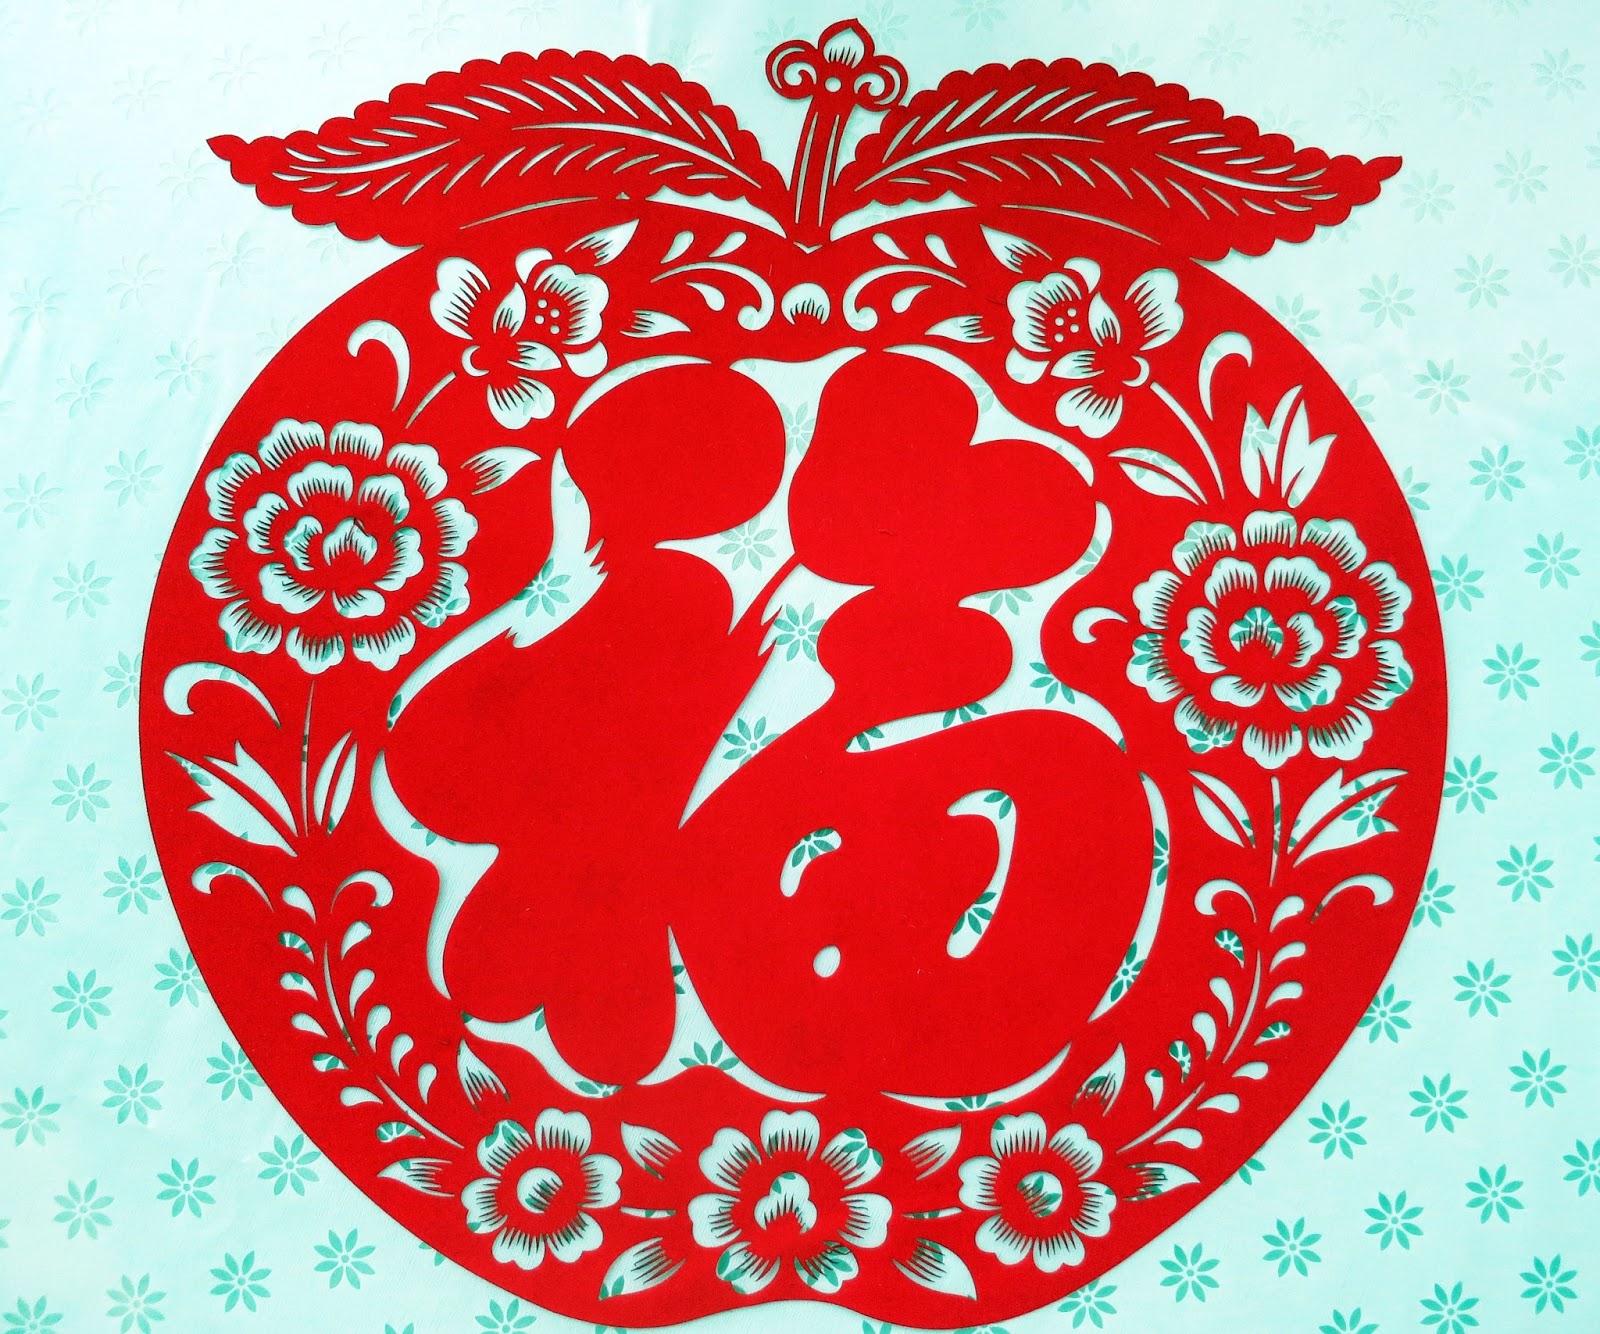 Chinese Paper Cutting Templates Printable - Printable World Holiday